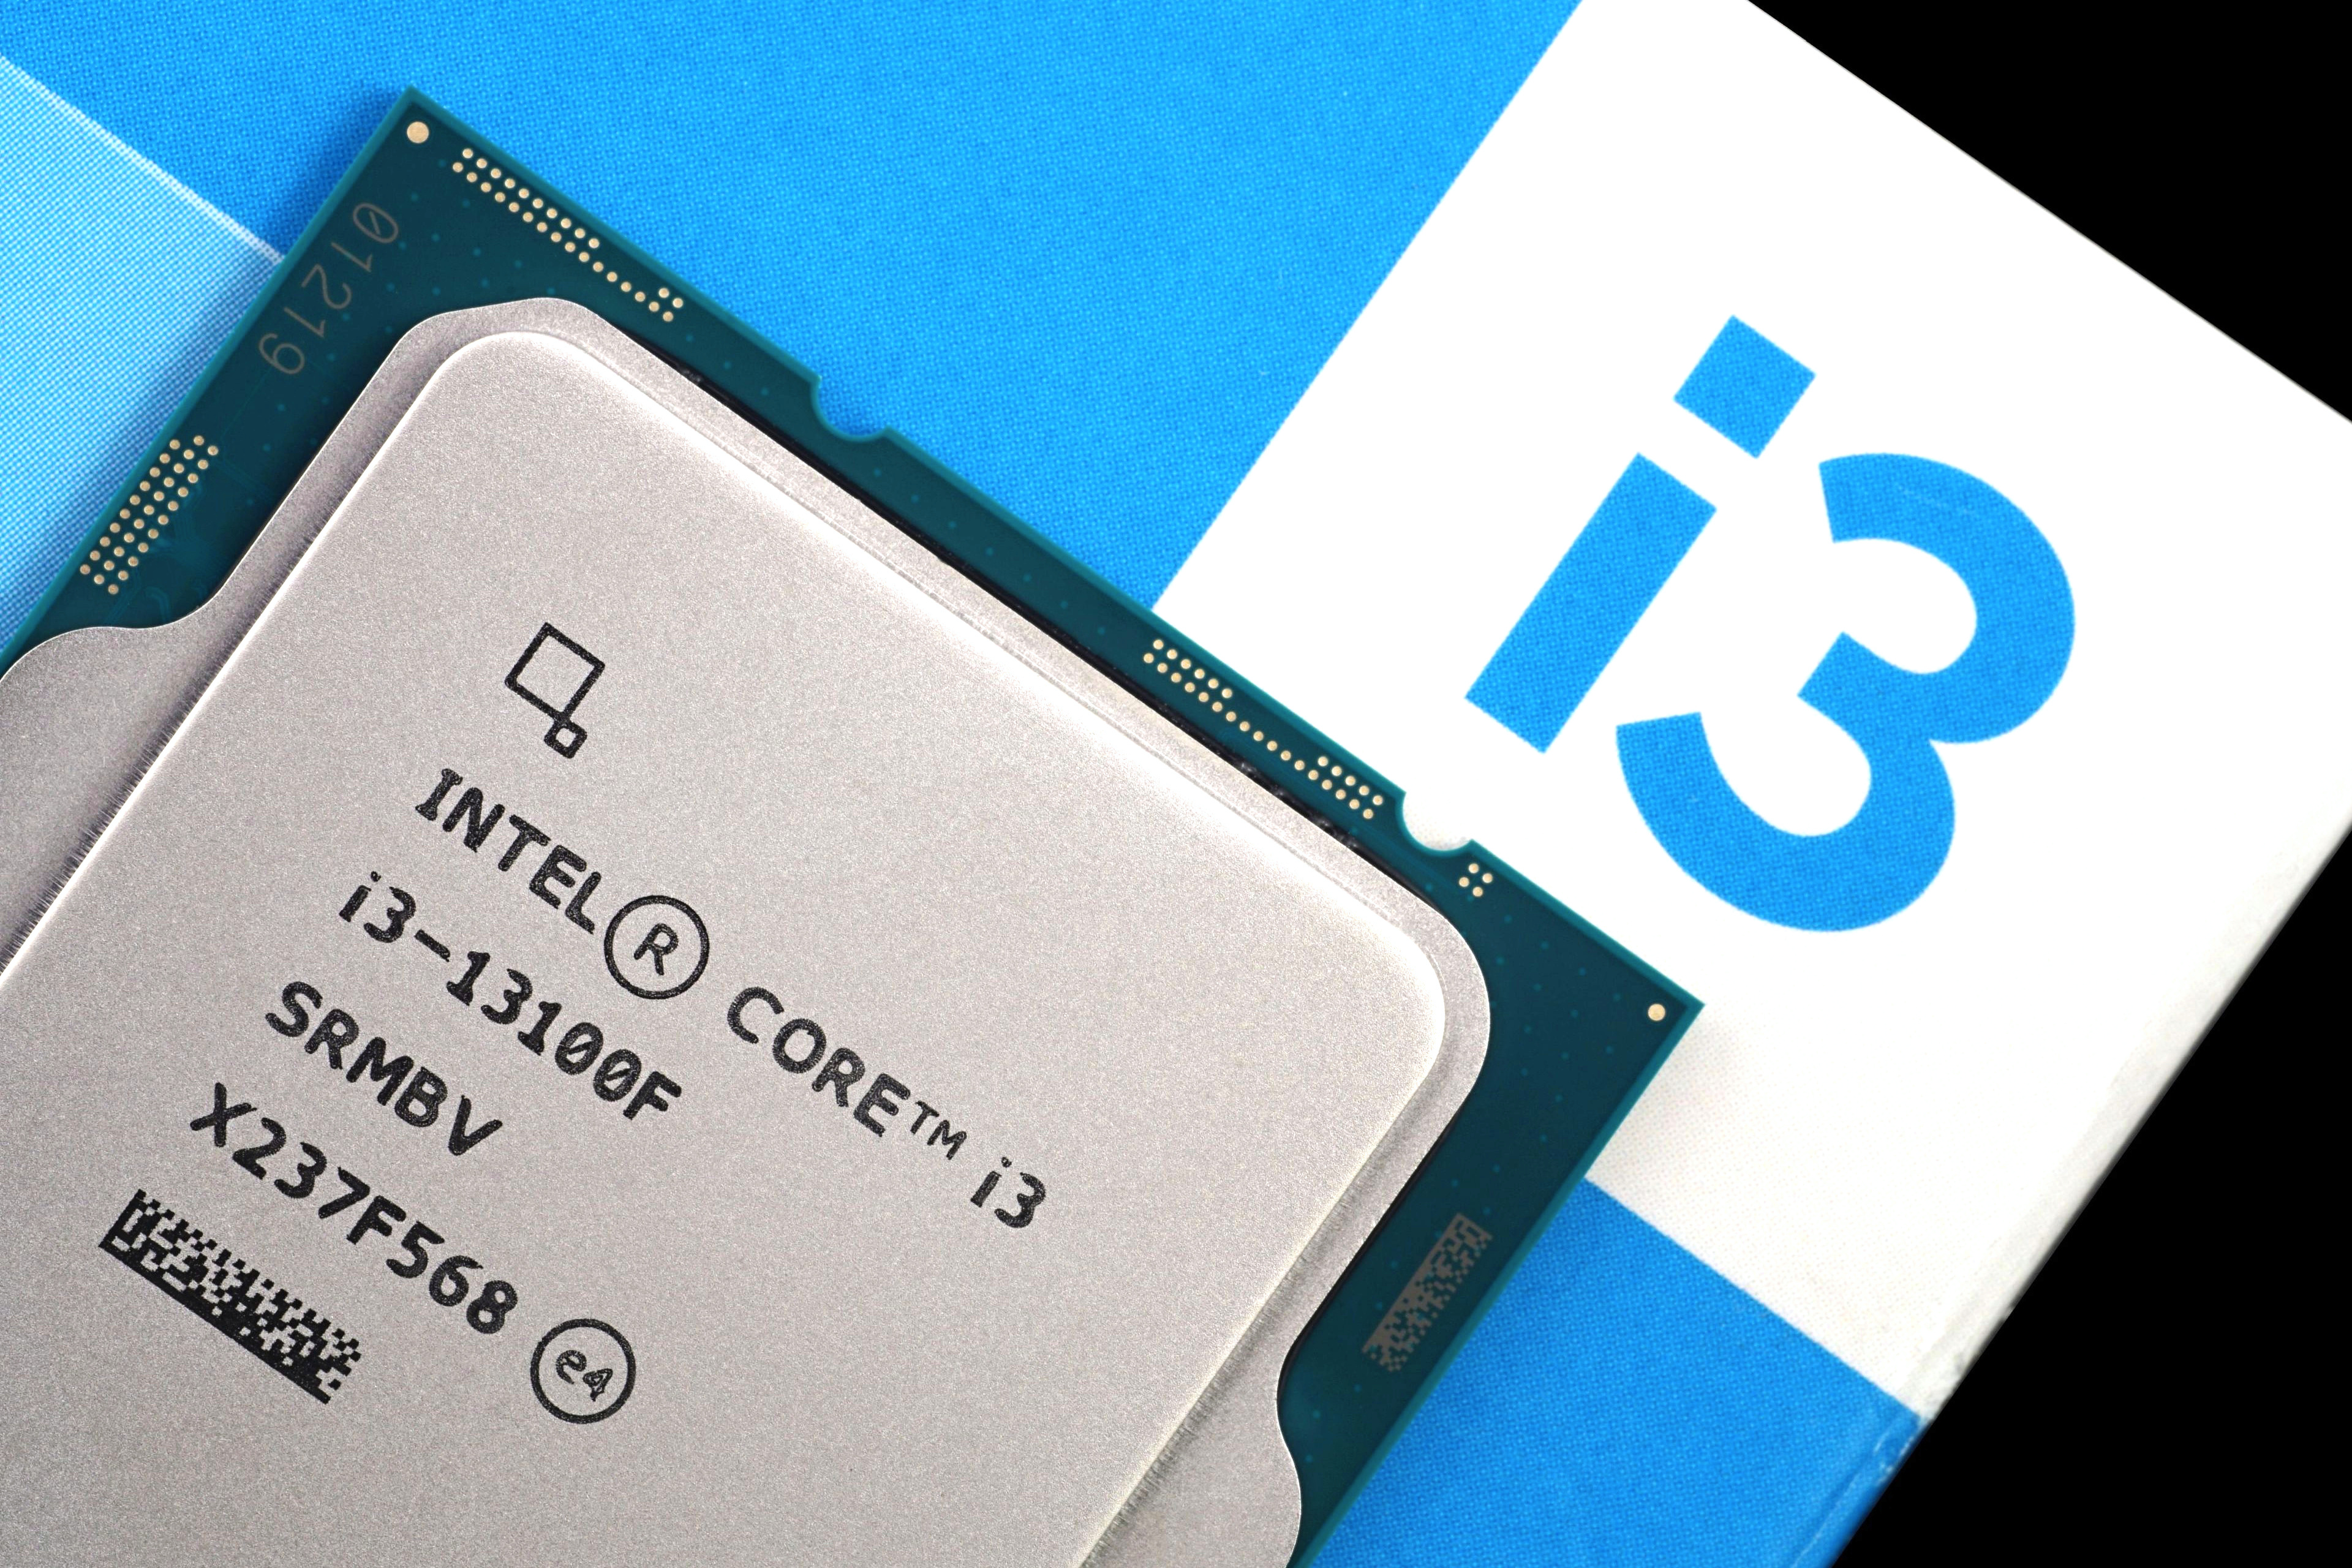 Intel Core i3-12100 Review: The Little Gaming Giant